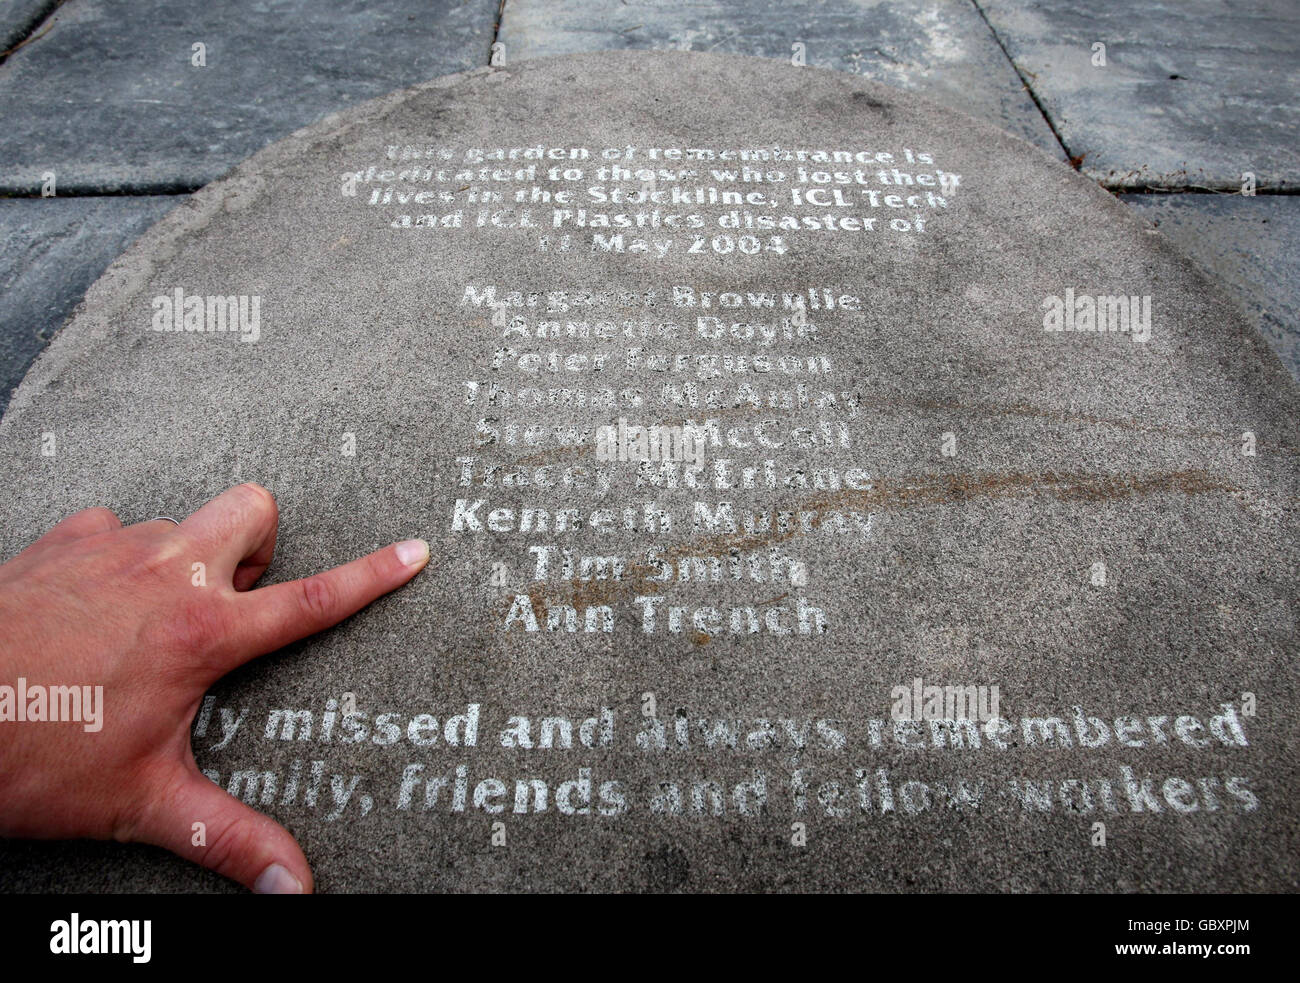 A stone with the names of the dead from the Stockline factory tragedy etched into it, in the memorial garden at the former site of the disaster which killed nine people and injuring 33. Stock Photo